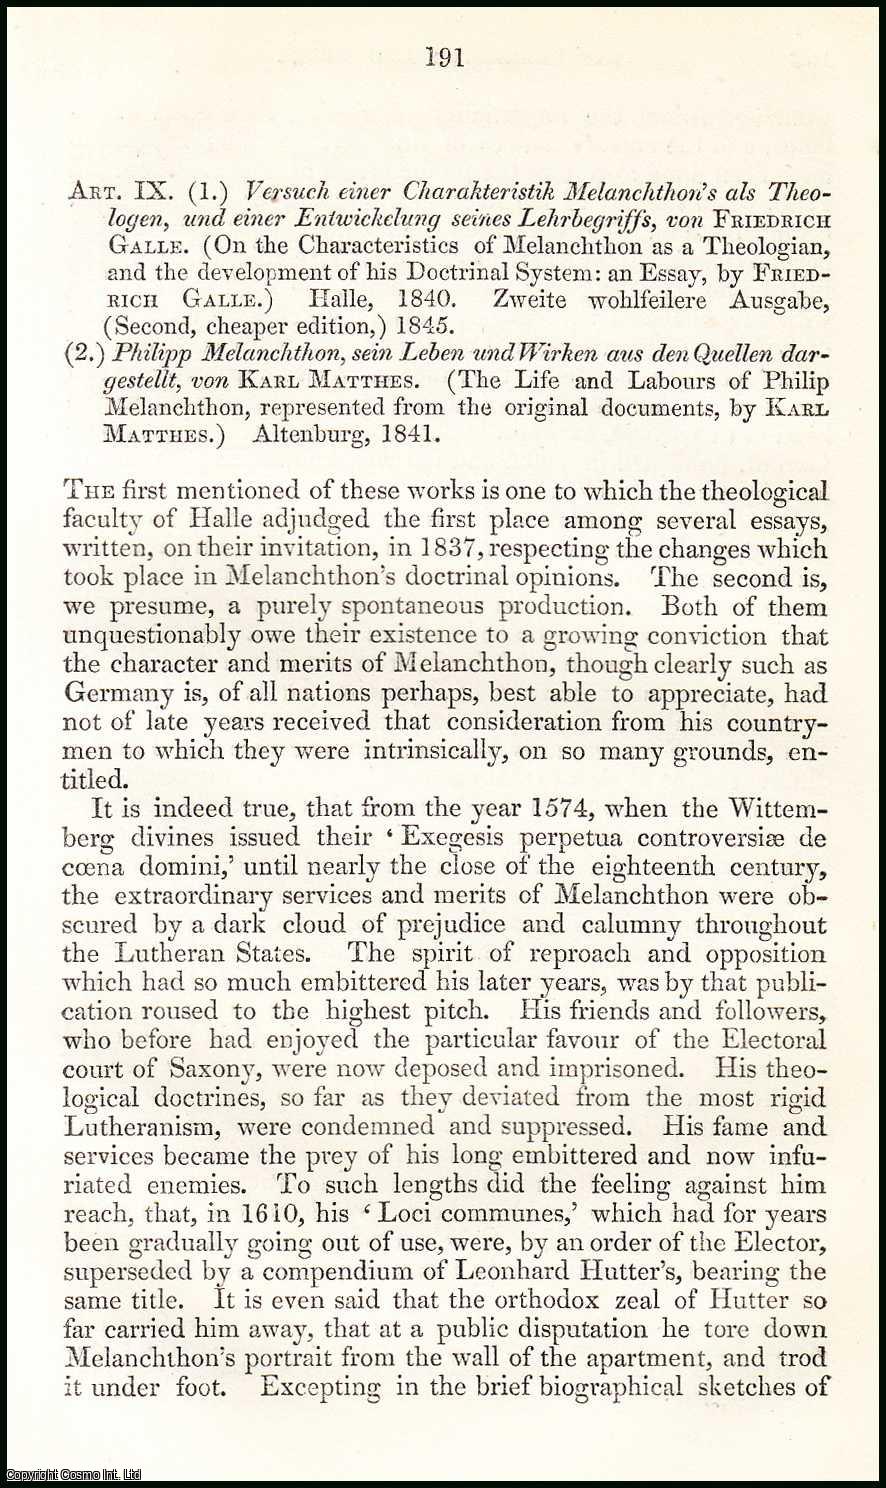 Author Unknown - The Character and Works of Melanchthon. A rare original article from the British Quarterly Review, 1846.